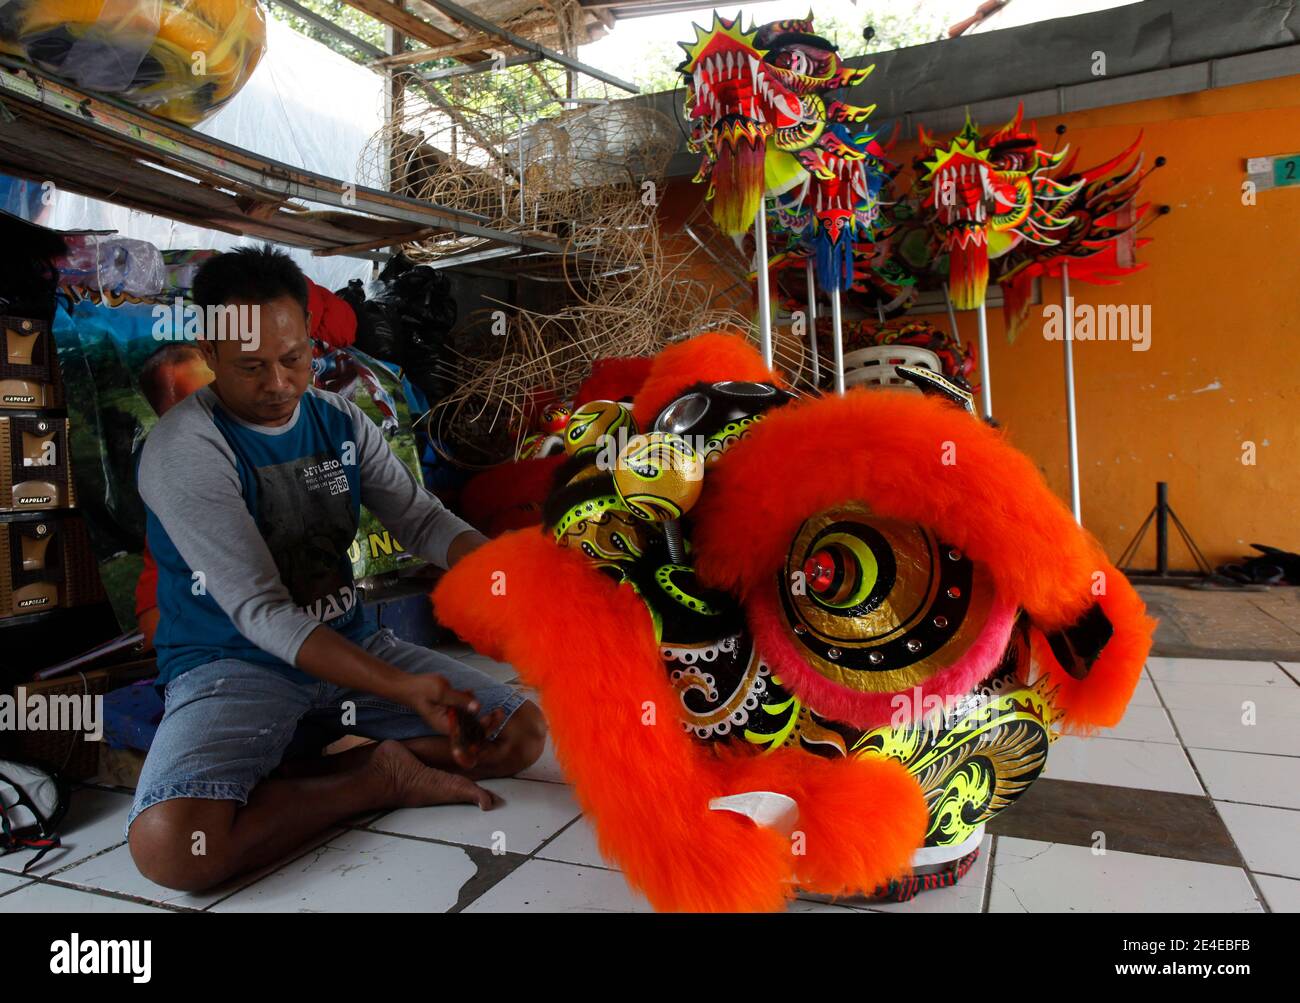 Bogor, Indonesia. 23rd Jan, 2021. A craftsmen maker of lion (Barongsai) and dragon (Liong) dance costumes, inspects his creations inside his house ahead of Lunar New Year celebrations, in Bogor, Indonesia on January 23, 2021. Millions of Chinese around the world will celebrate the Lunar New Year, 2021 is the year of the Ox, which falls on February 12th amid the global coronavirus COVID-19 pandemic. (Photo by Adrian/INA Photo Agency/Sipa USA) Credit: Sipa USA/Alamy Live News Stock Photo